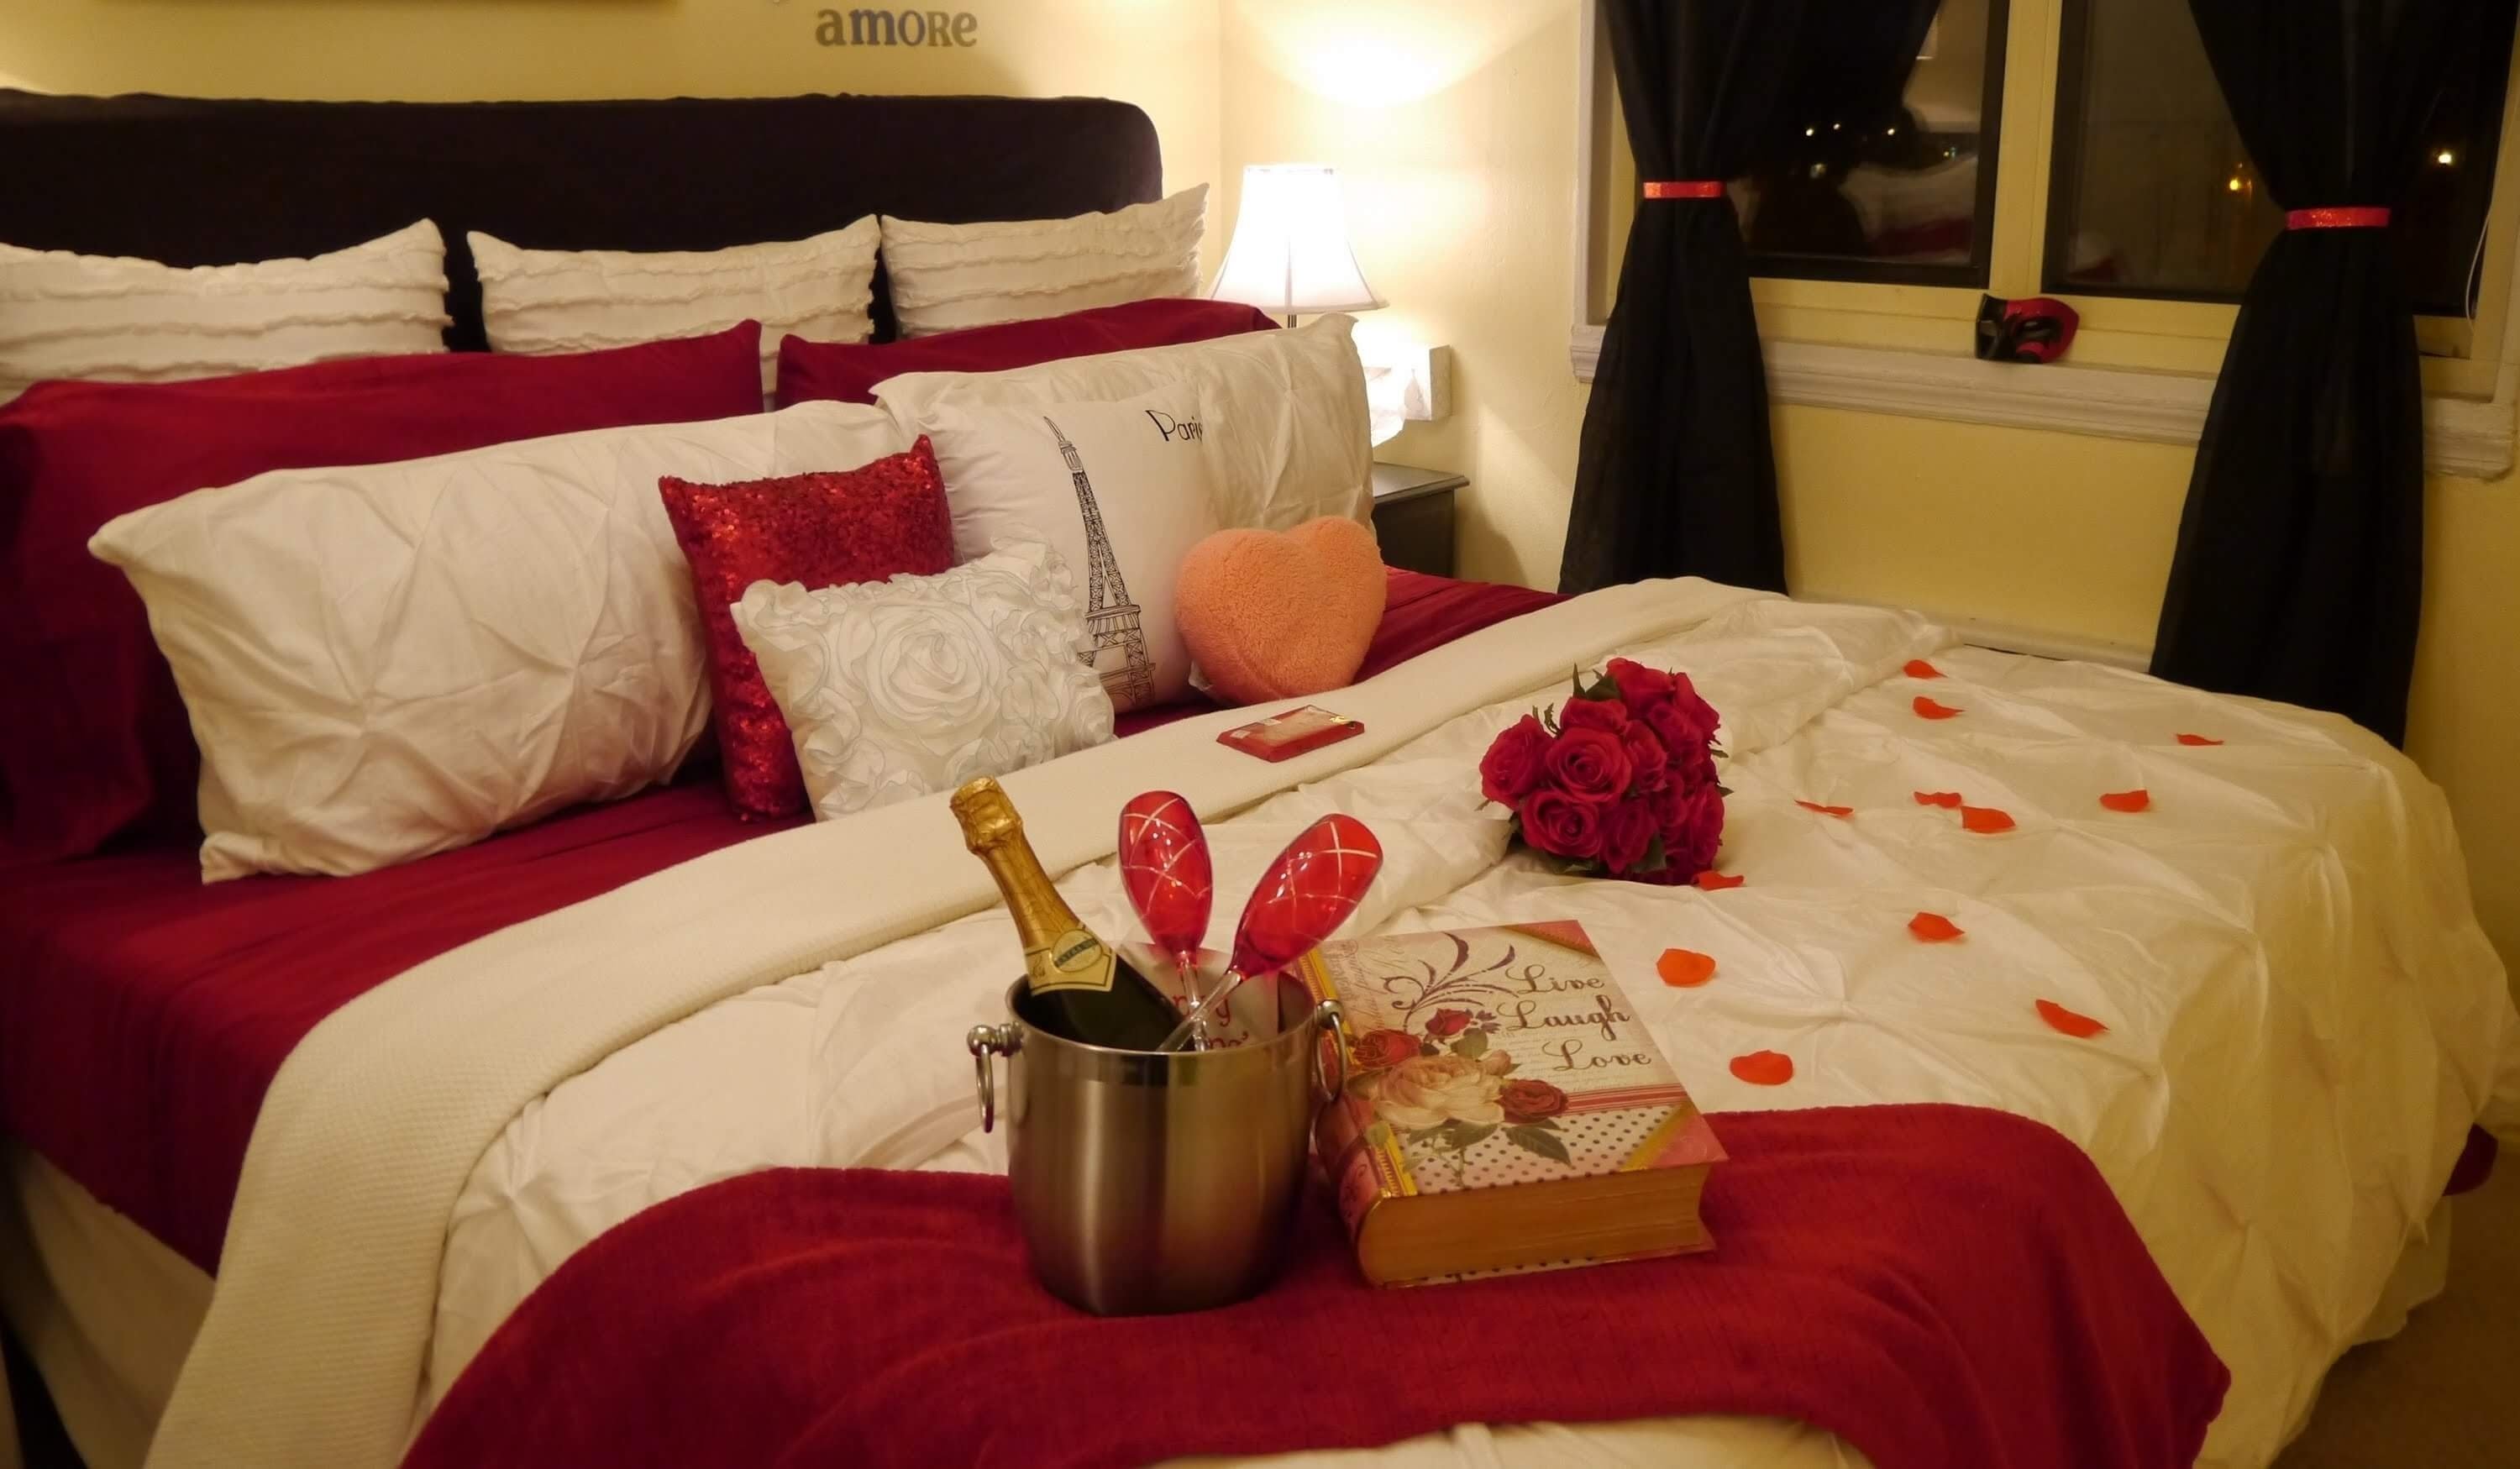 10 Great Romantic Valentines Day Ideas For Her romantic valentines day ideas him home eromantic home living now 6 2022